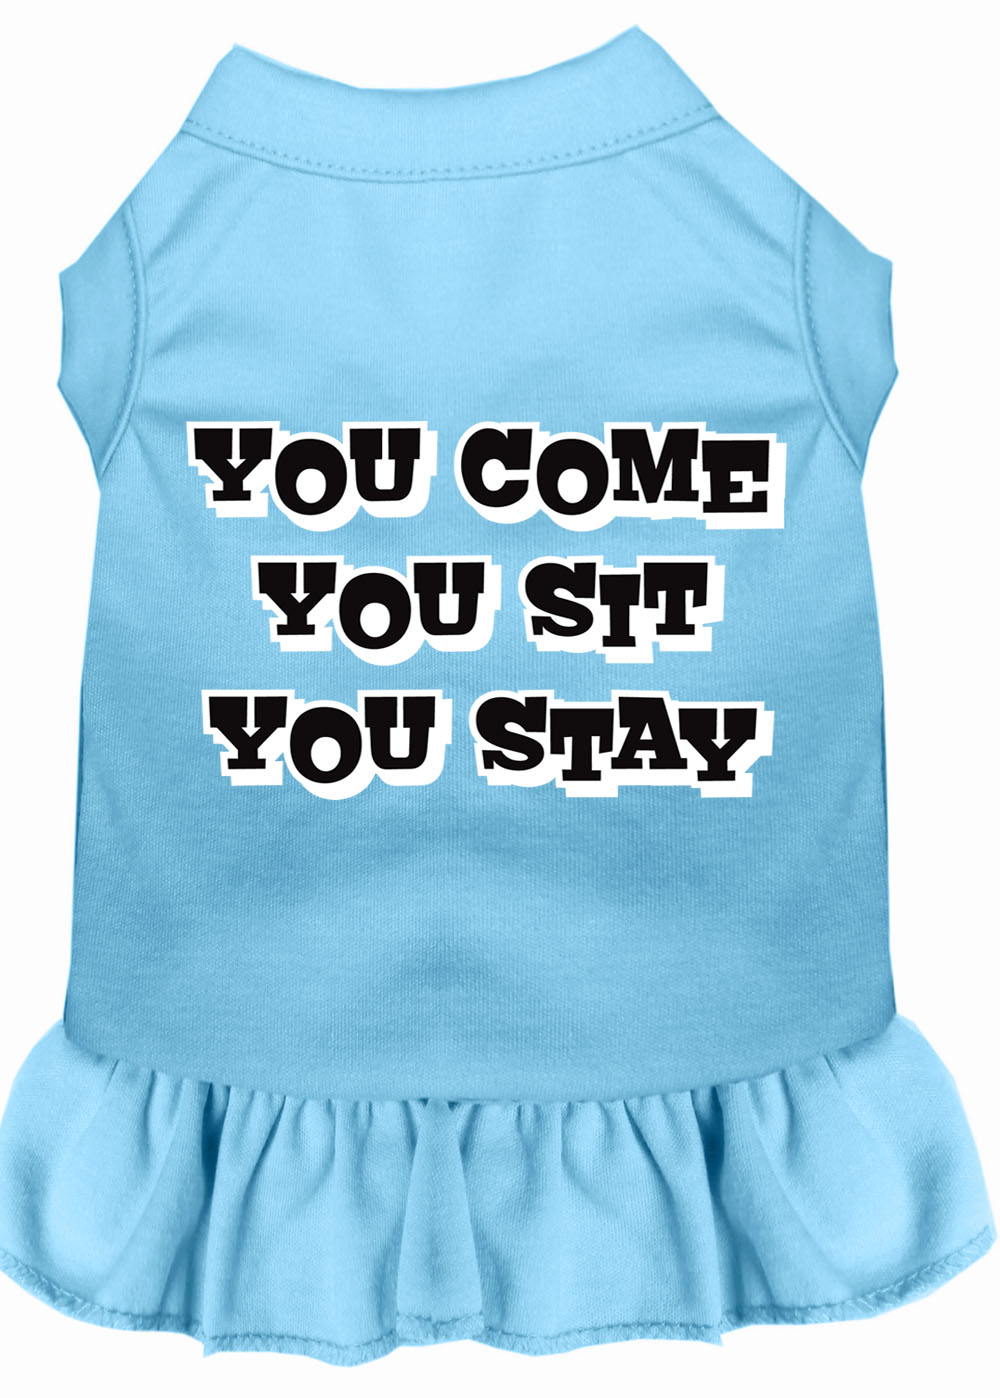 You Come, You Sit, You Stay Screen Print Dress Baby Blue 4x (22) GreatEagleInc